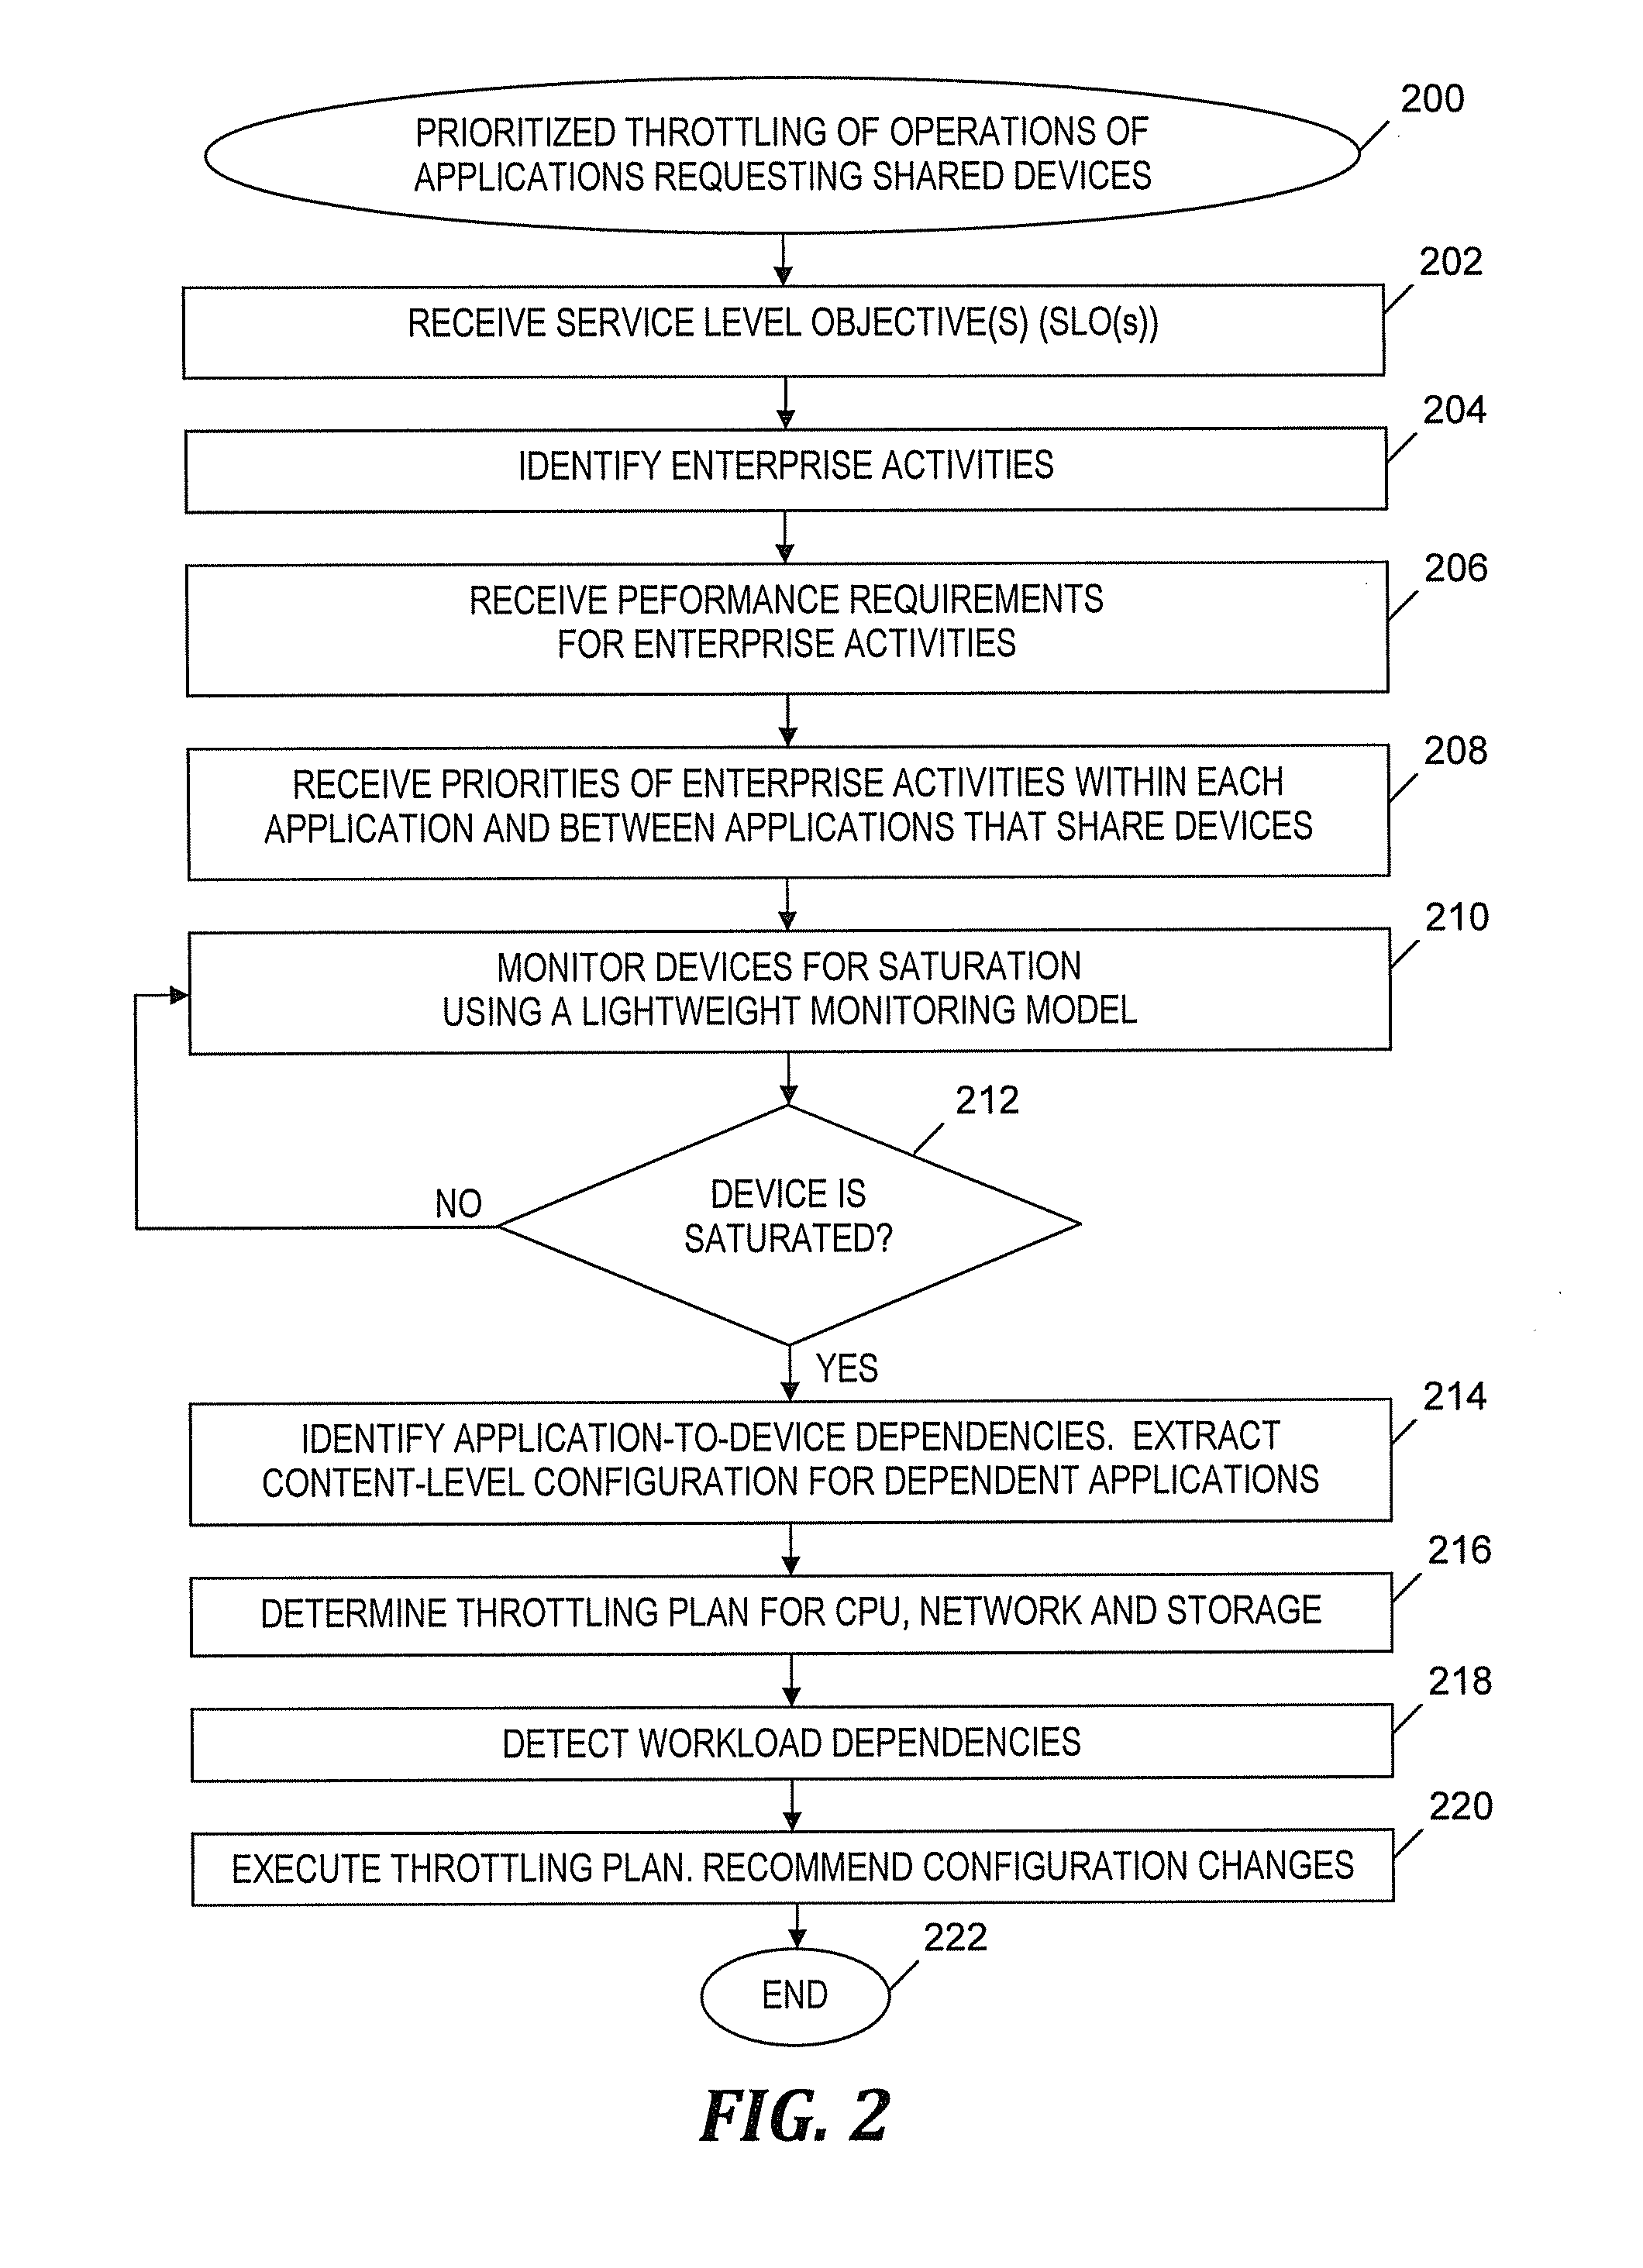 Integrated differentiated operation throttling